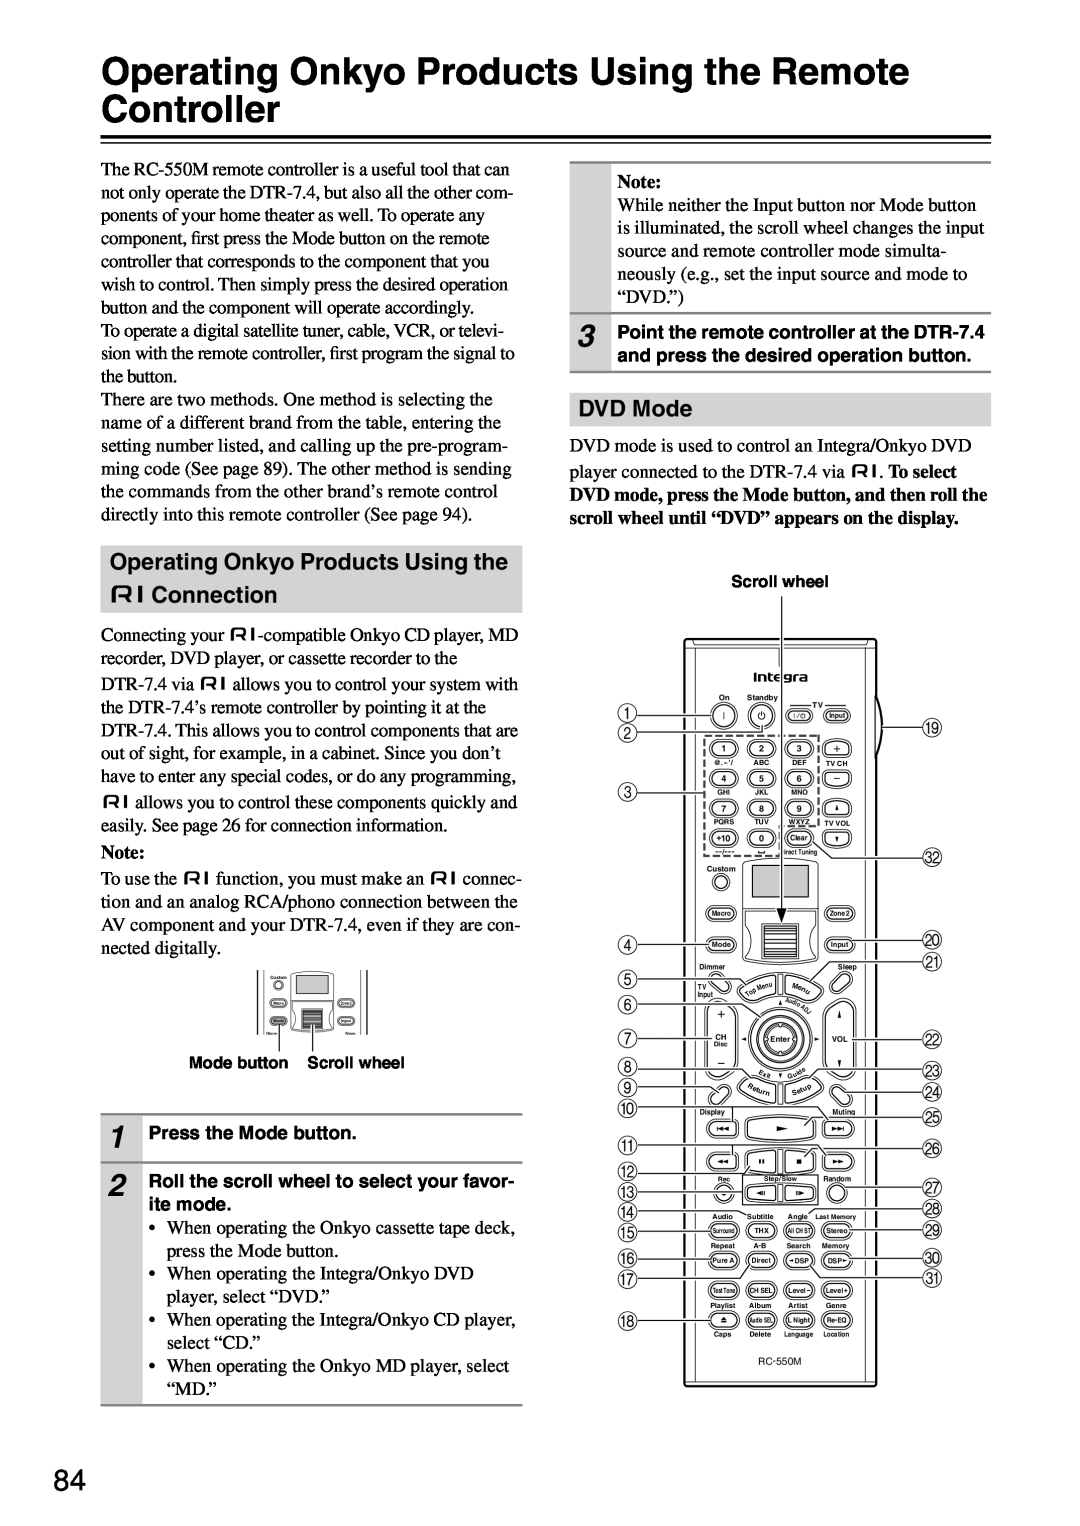 Integra DTR-7.4 instruction manual Operating Onkyo Products Using the Connection, DVD Mode, Press the Mode button, ite mode 